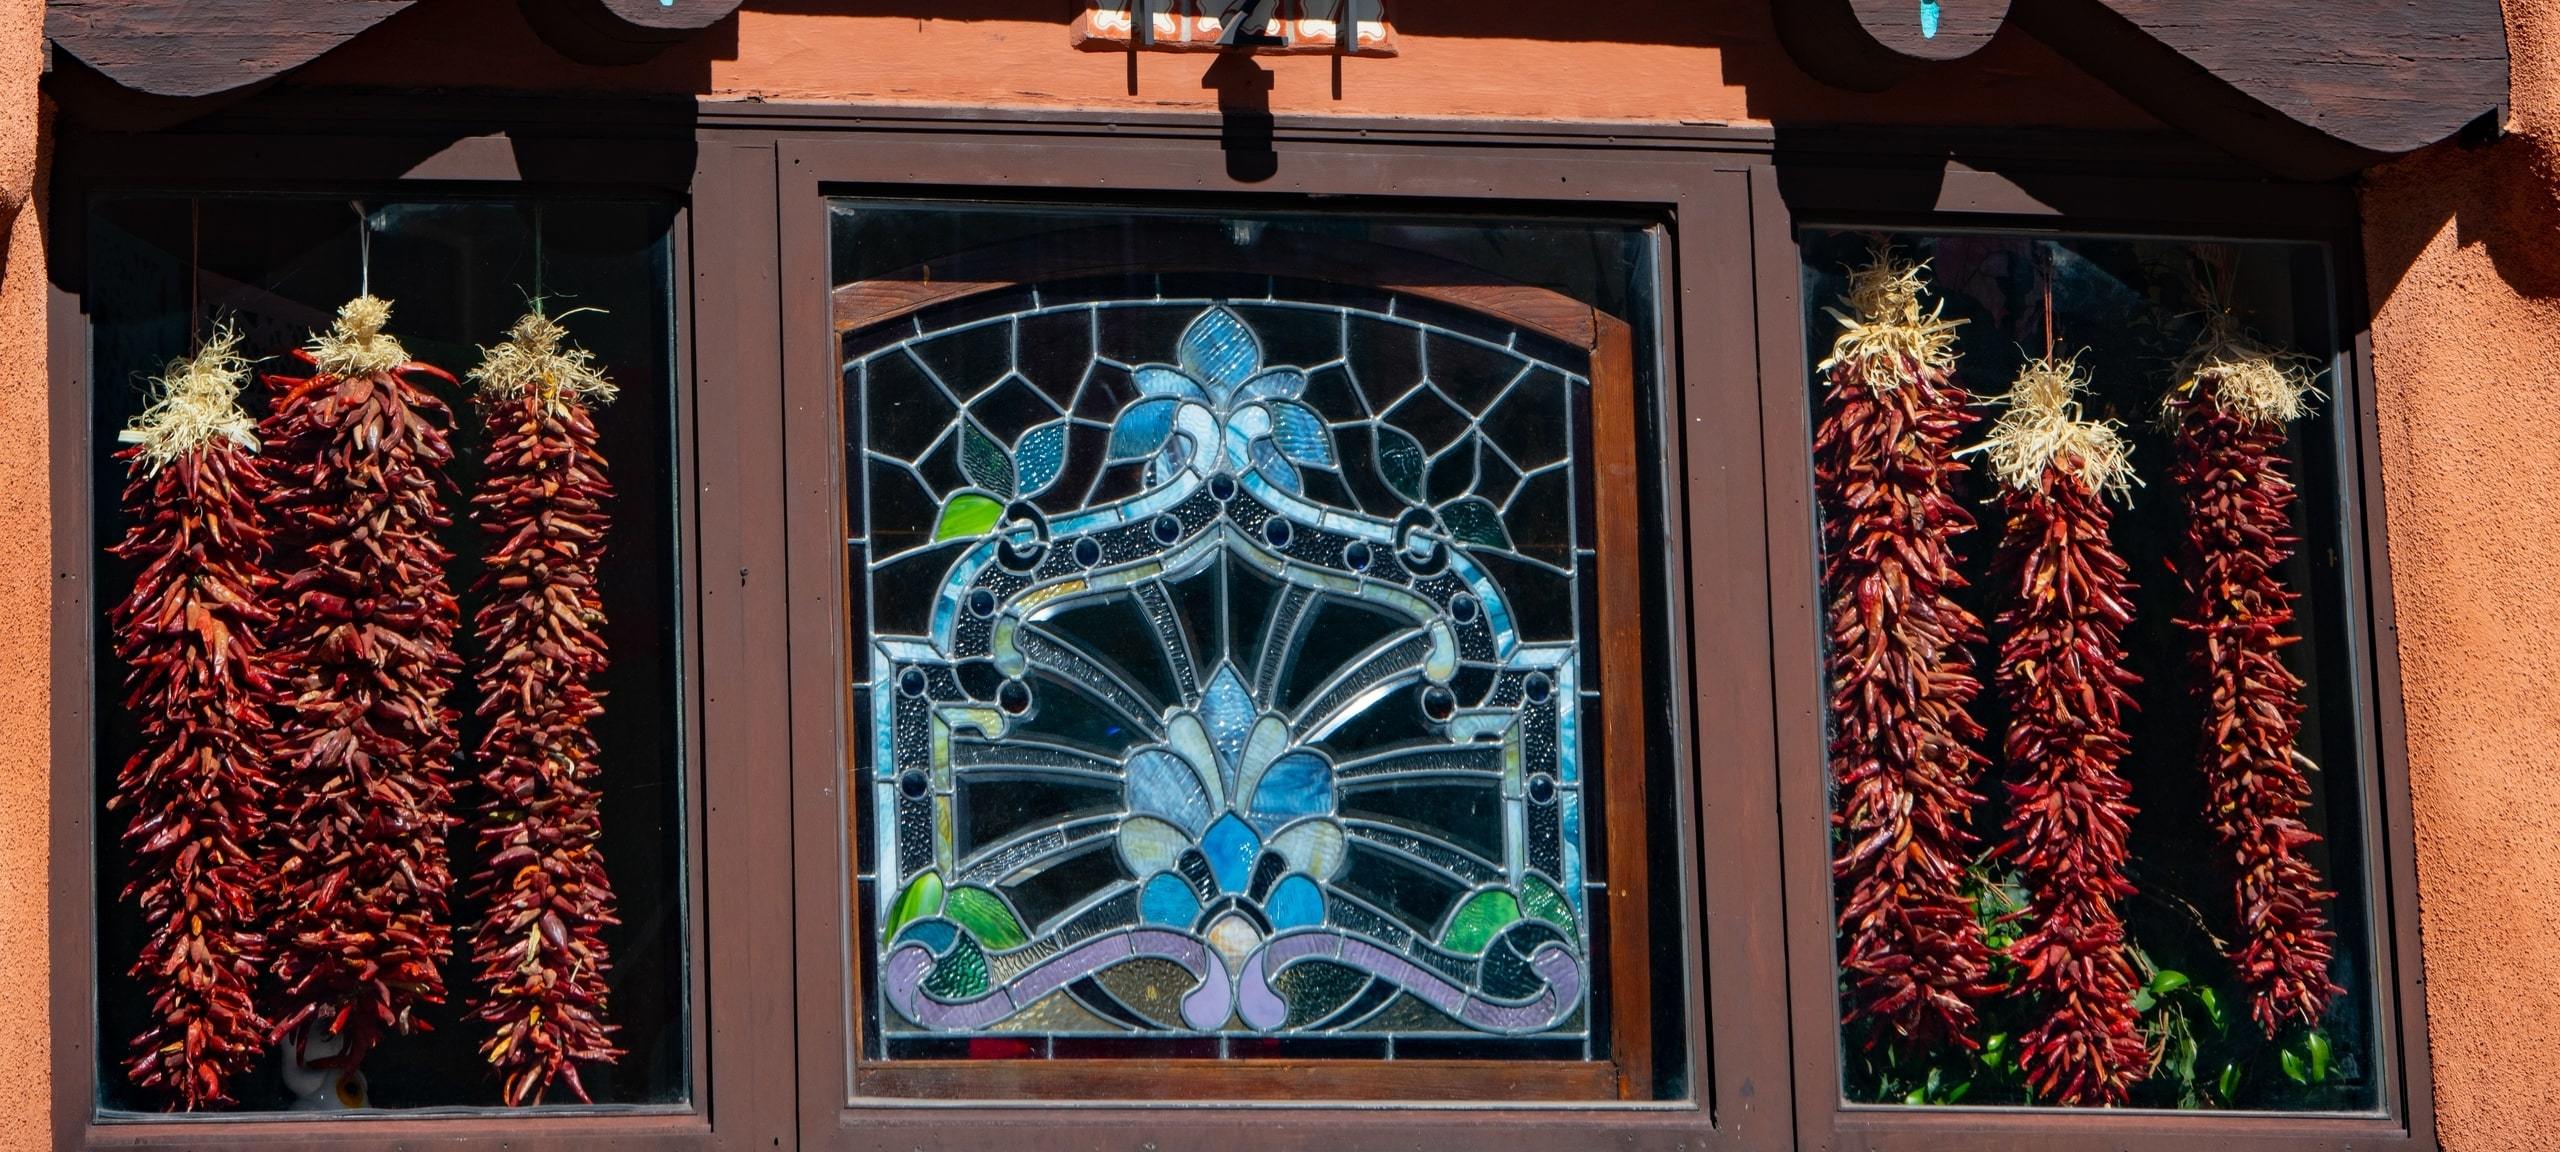 Exterior of historic home stained glass window, Santa Fe